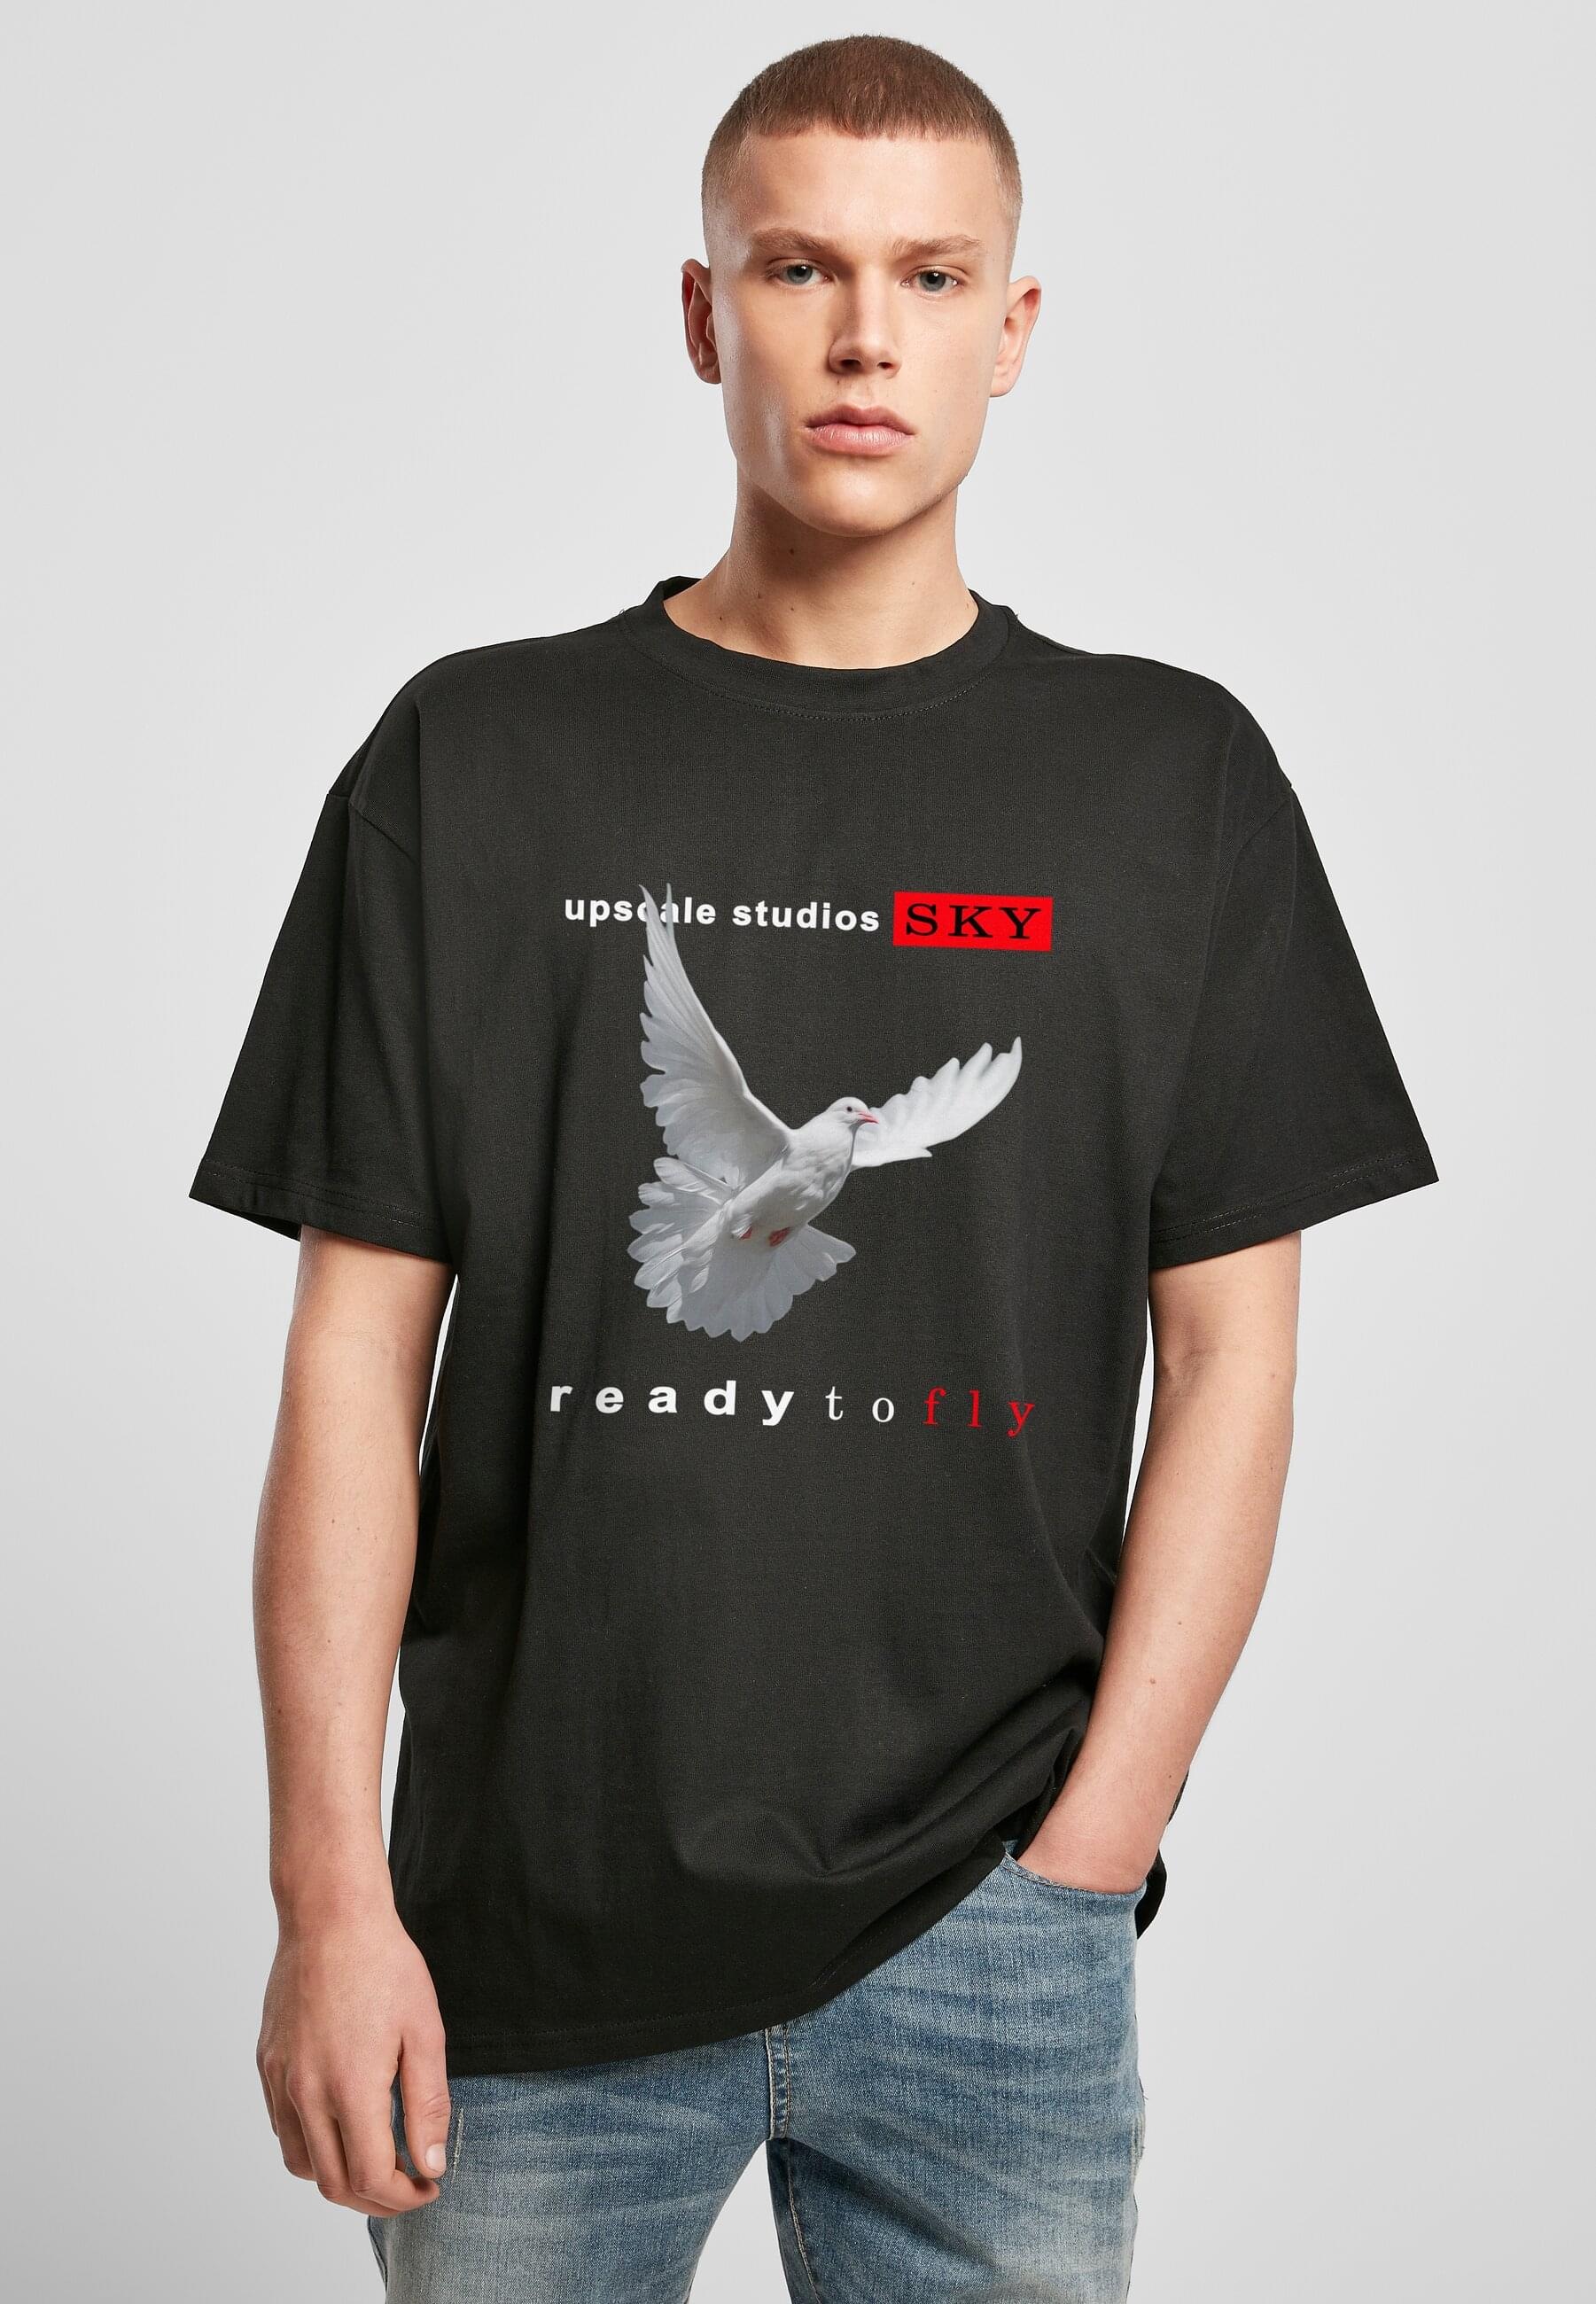 Black Friday Upscale by Mister Tee T-Shirt »Unisex Ready to fly Oversize Tee«,  (1 tlg.) | BAUR